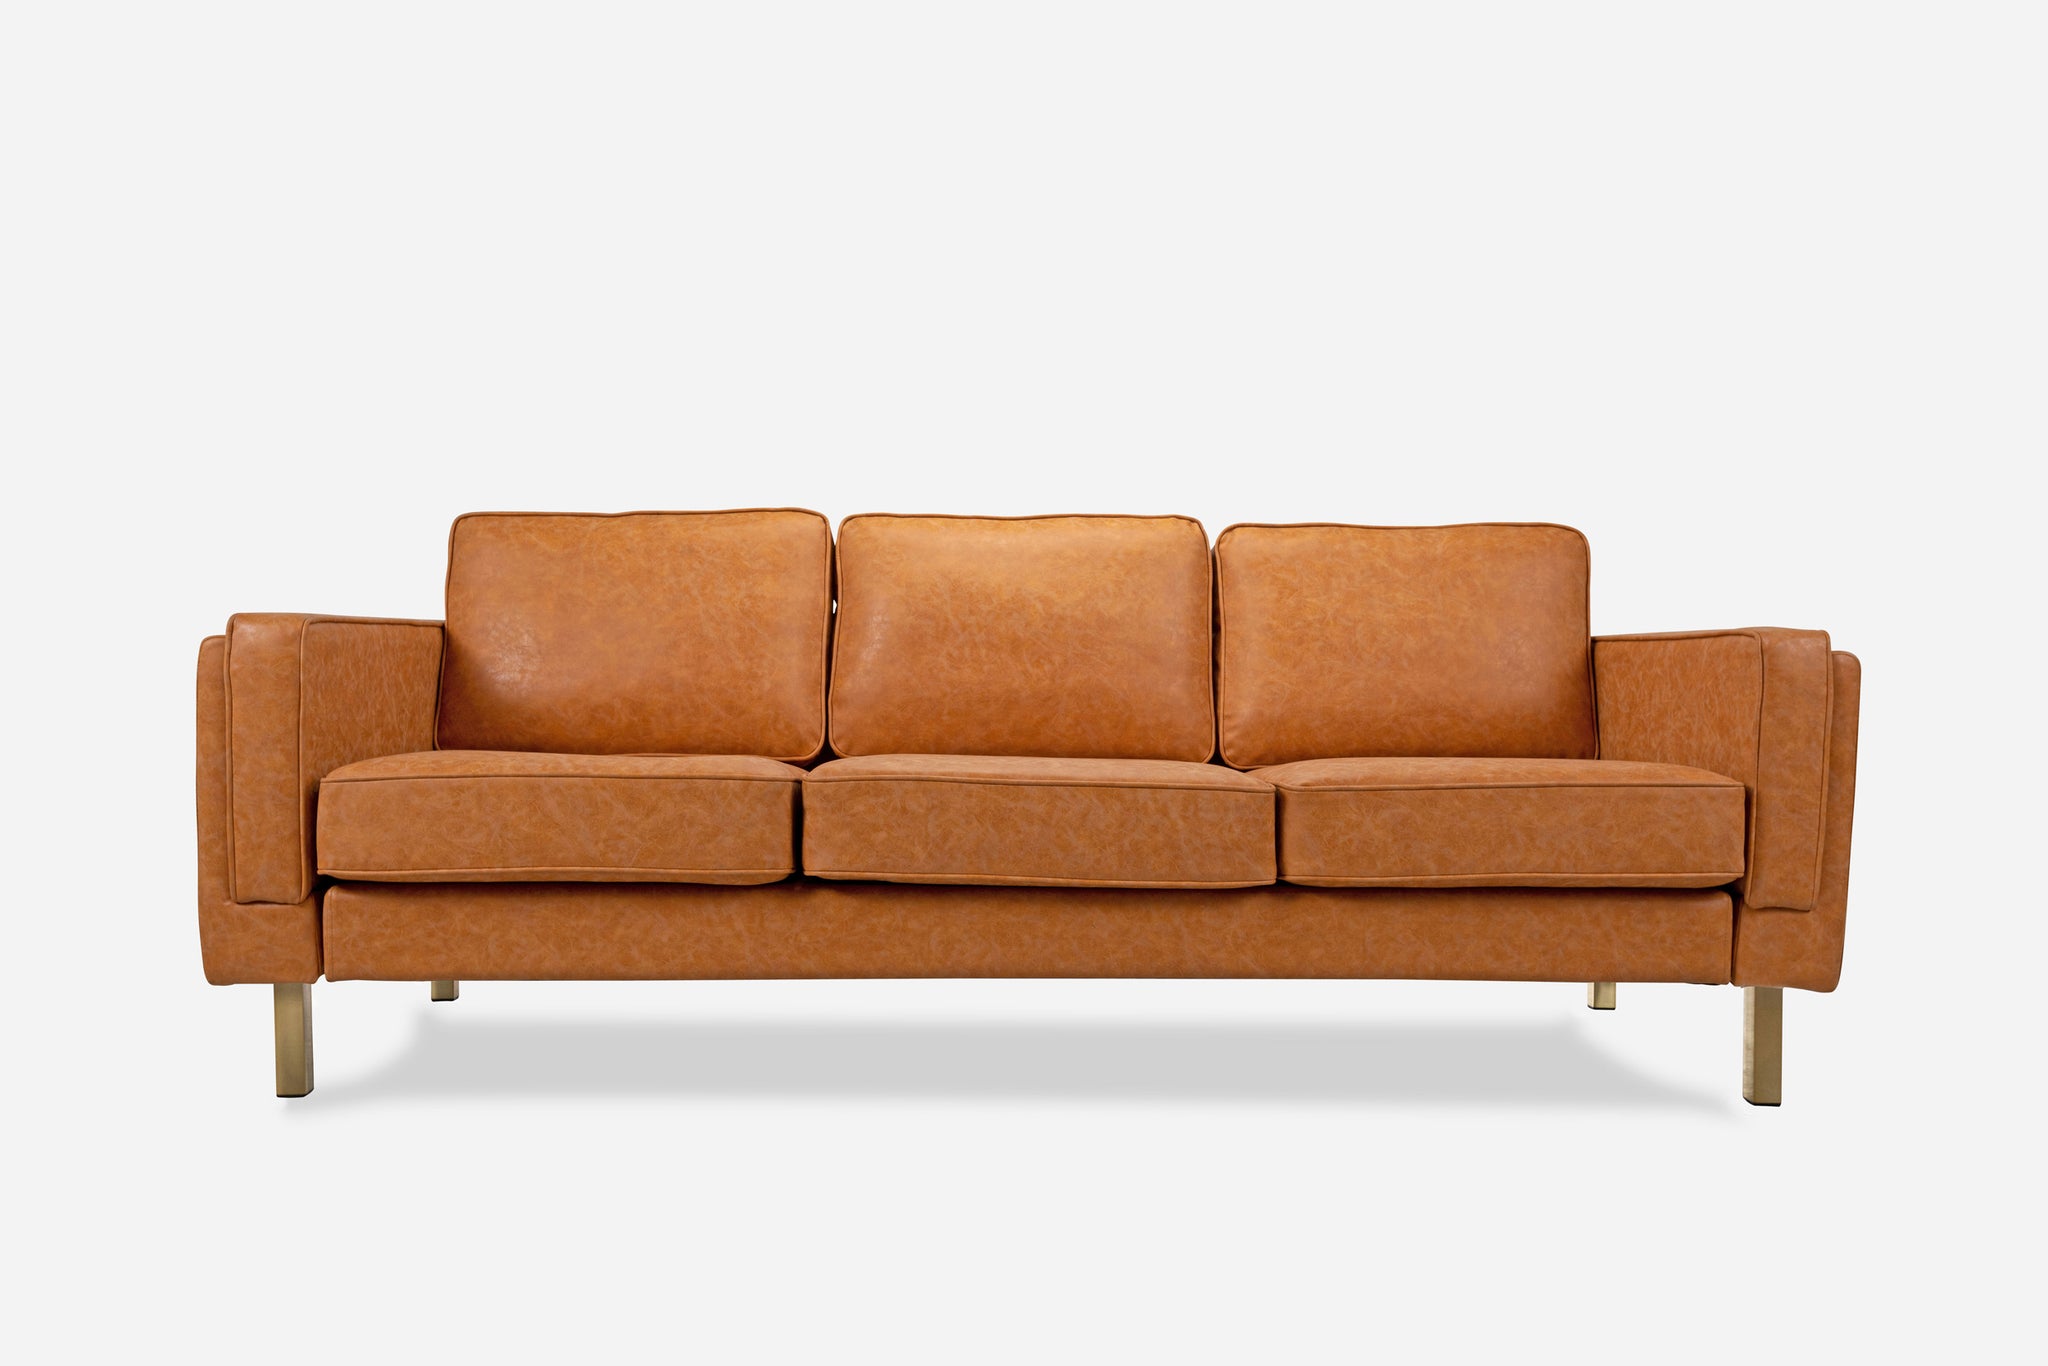 albany sofa shown in distressed vegan leather with gold legs